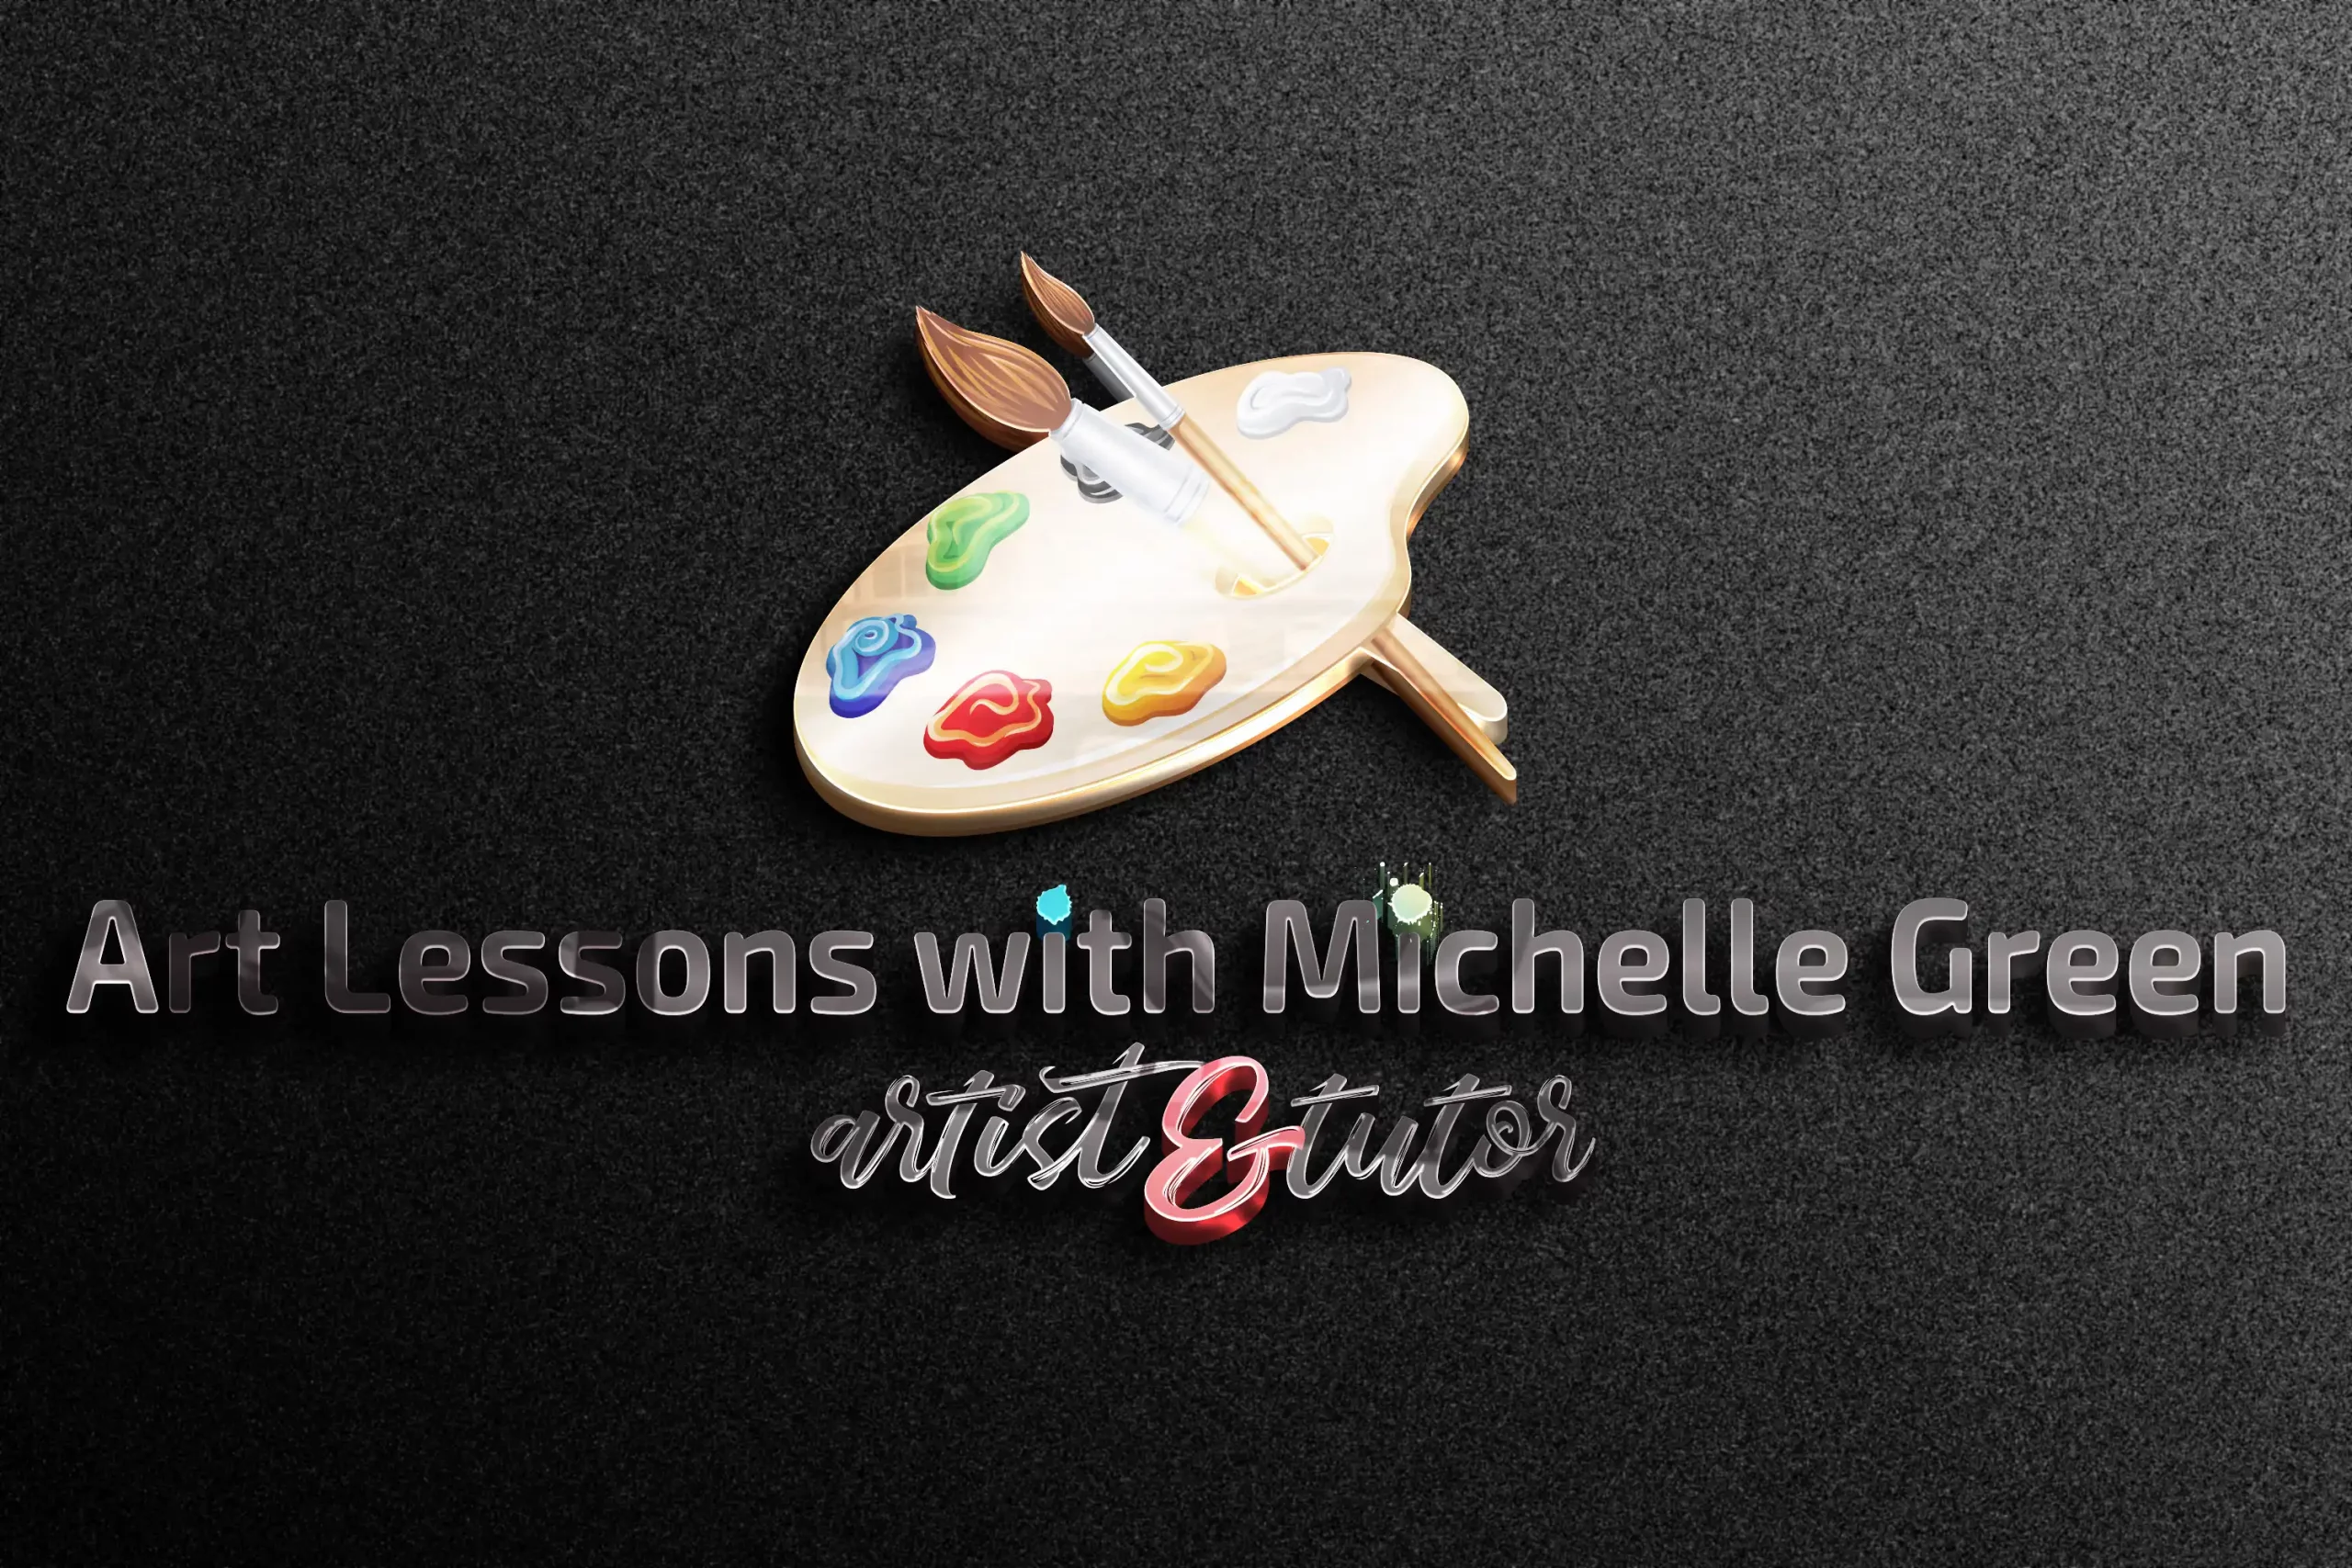 Logo Making made easy for Art Lessons With Michelle in Auckland. Logo Design made by XDC.NZ, the Logo Designer or Logo Maker based in Christchurch & Rolleston Selwyn NZ. Call Clint now on 021 11 44 014